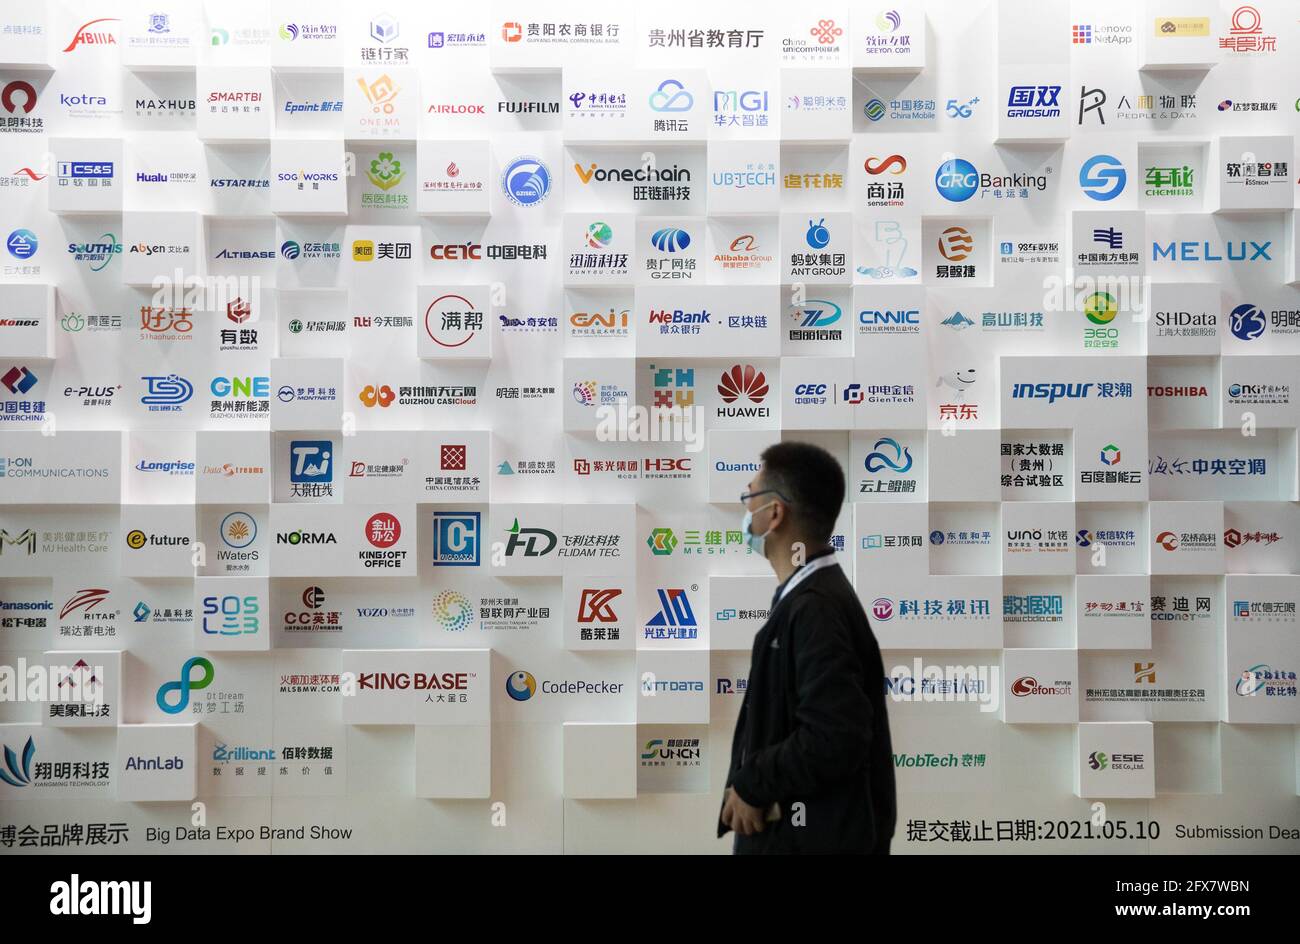 (210526) -- GUIYANG, May 26, 2021 (Xinhua) -- A visitor walks past a billboard displaying brands of exhibitors at the China International Big Data Industry Expo 2021 in Guiyang, southwest China's Guizhou Province, May 26, 2021. The China International Big Data Industry Expo 2021 opened here on Wednesday, showcasing cutting-edge scientific and technological innovations and achievements in the relevant area. Under the theme "Embrace digital intelligence, Deliver new development," this year's expo is scheduled both online and offline. The expo will witness six high-level dialogues to discuss Stock Photo